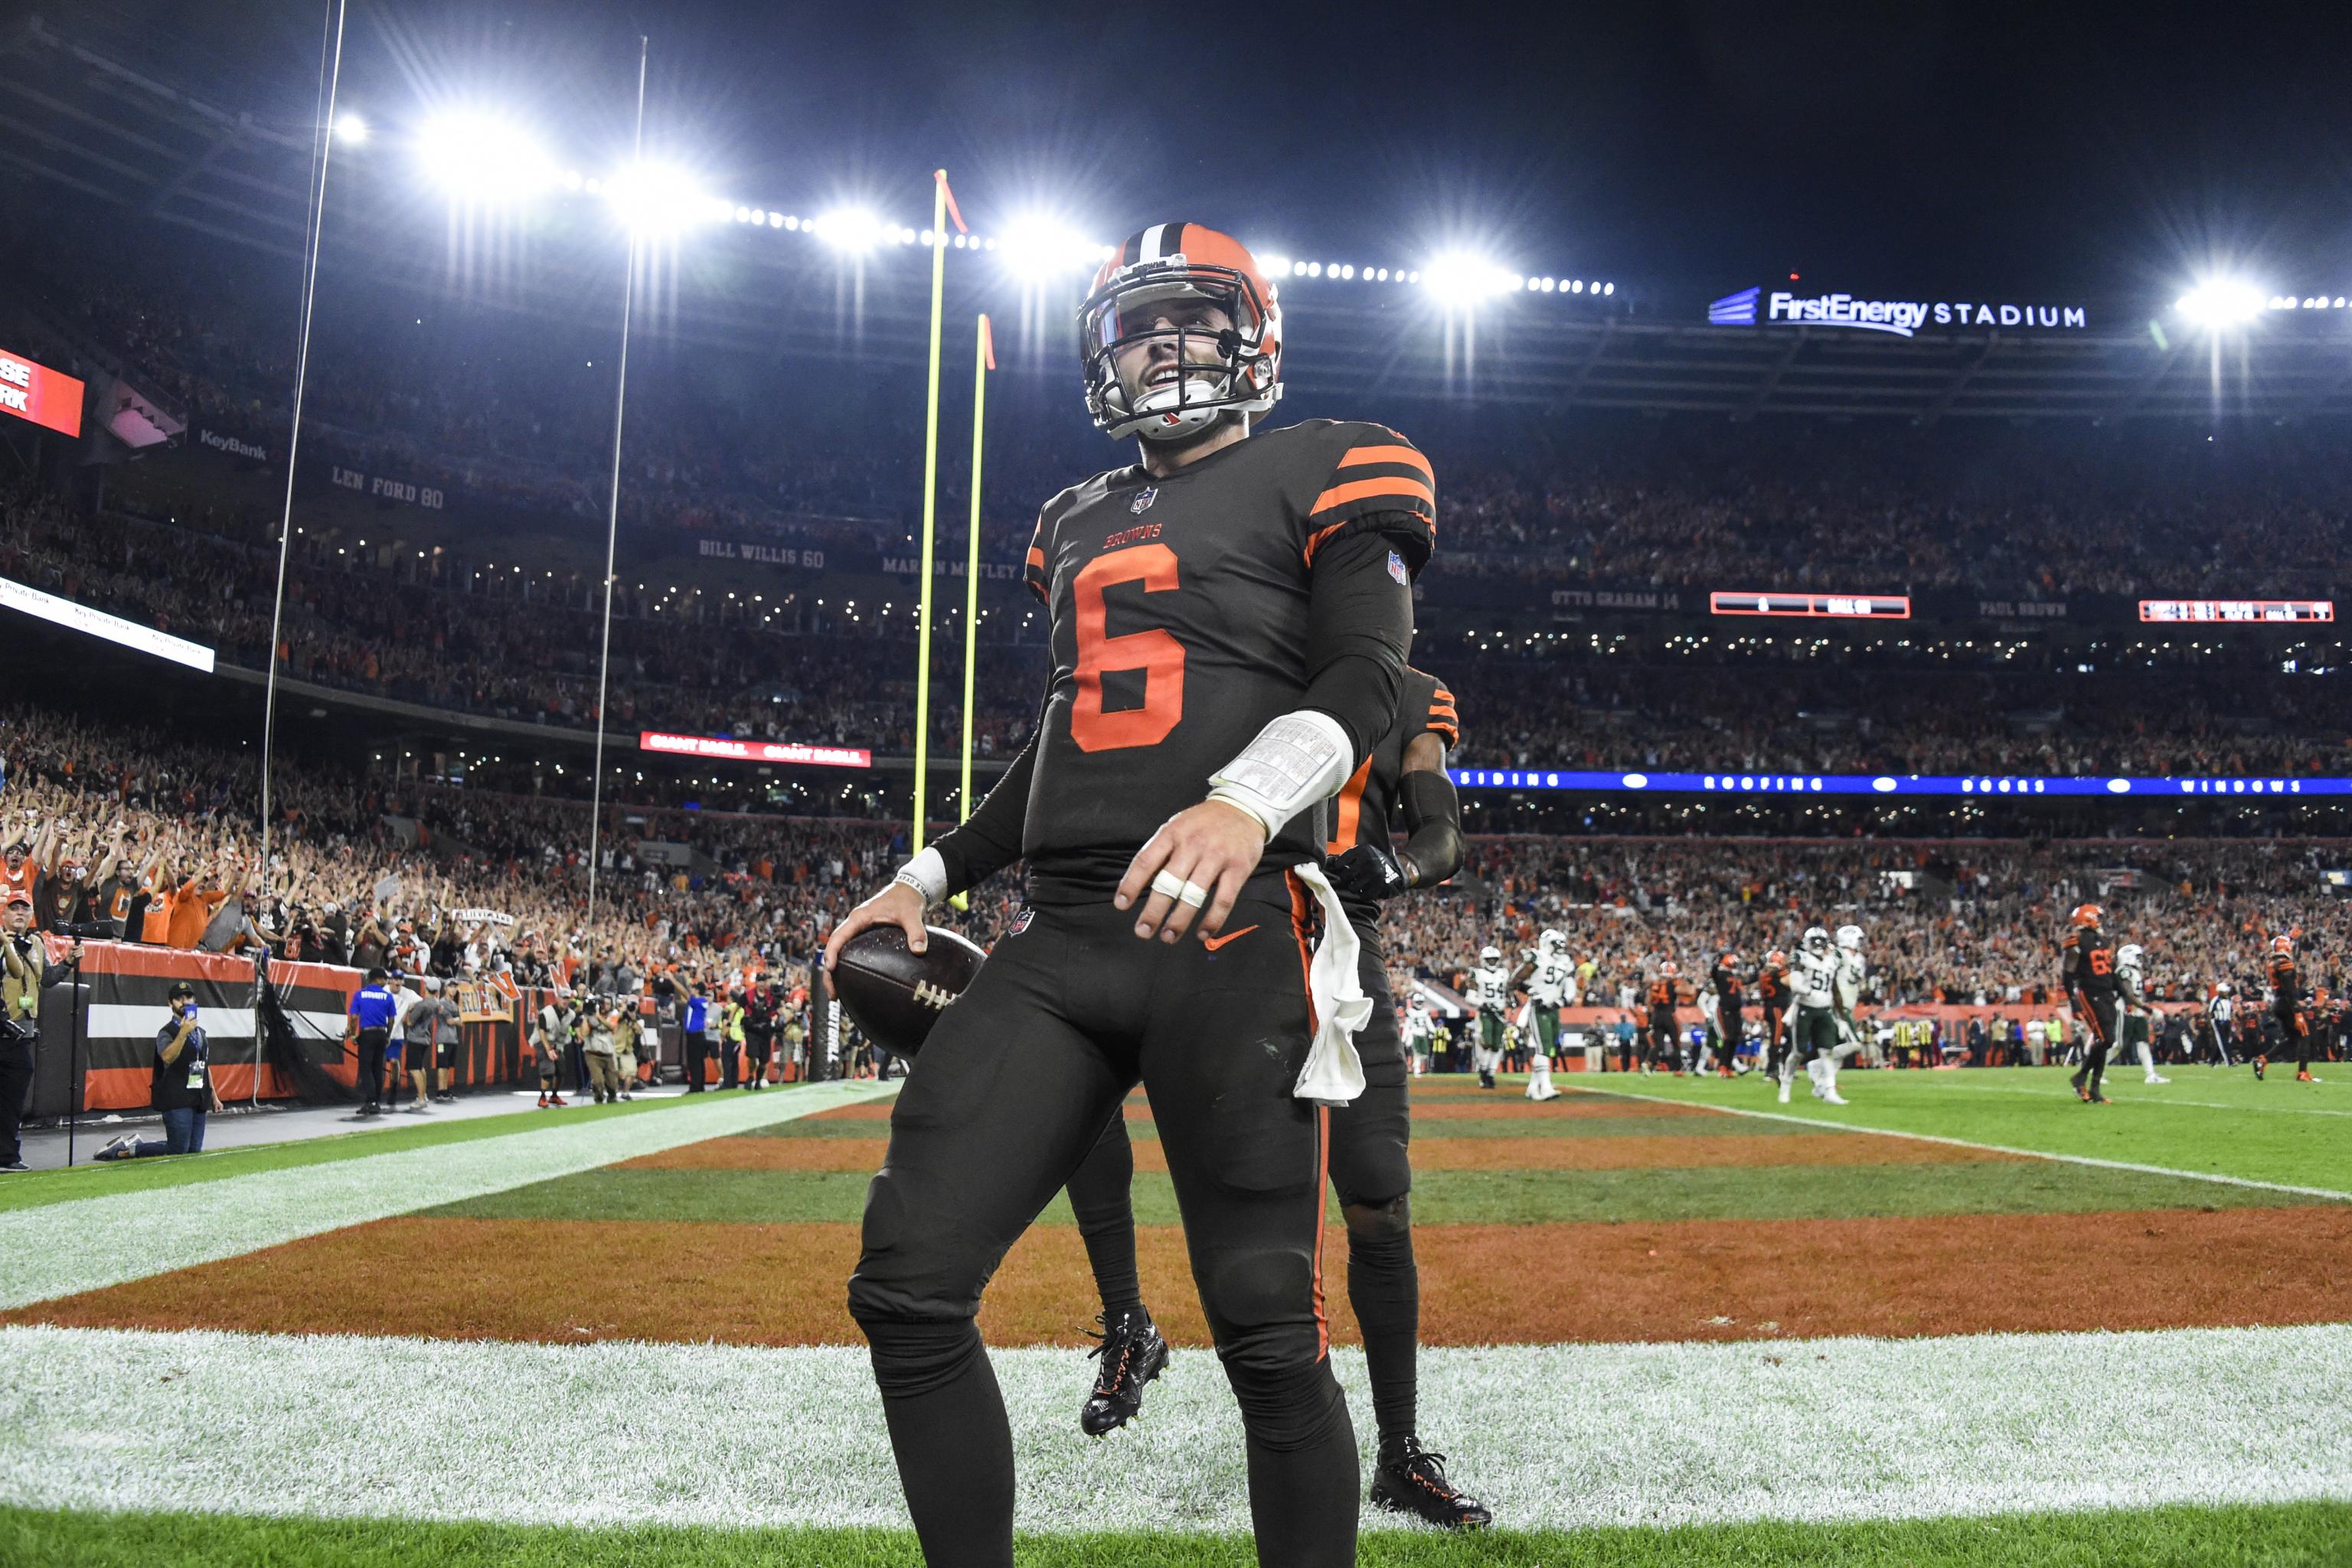 Browns' Color Rush uniforms are an improvement, but they'll have to wait